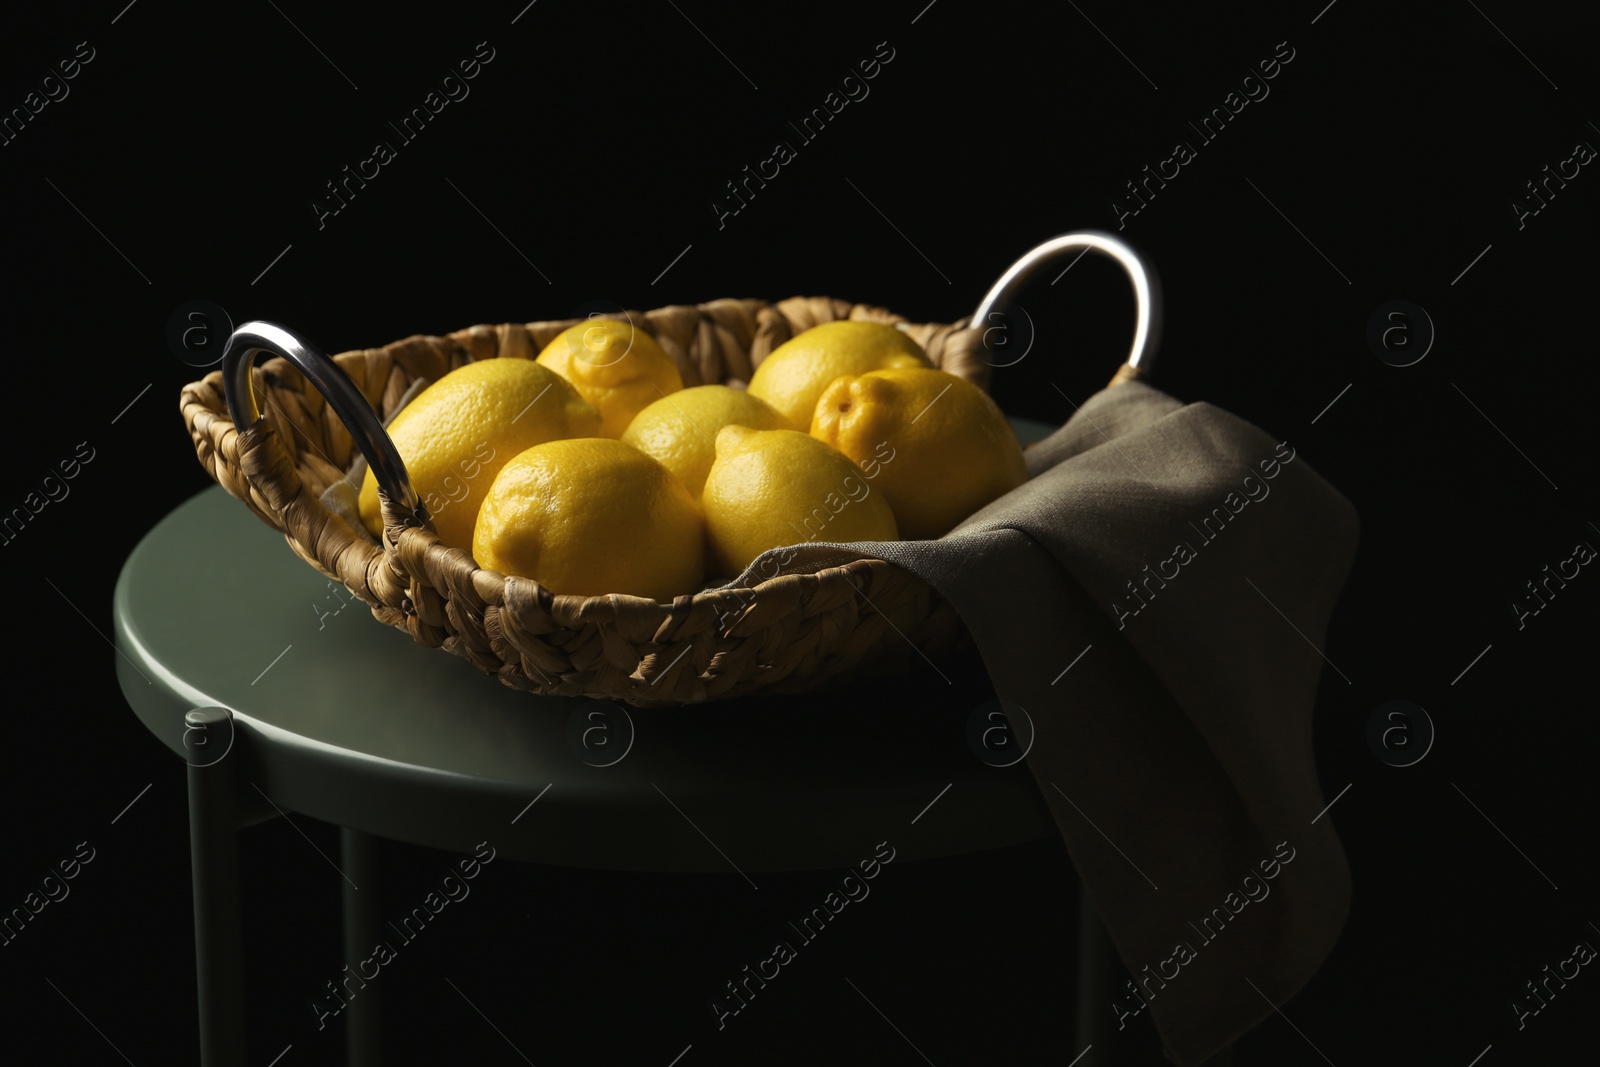 Photo of Basket with whole lemons on small table against dark background